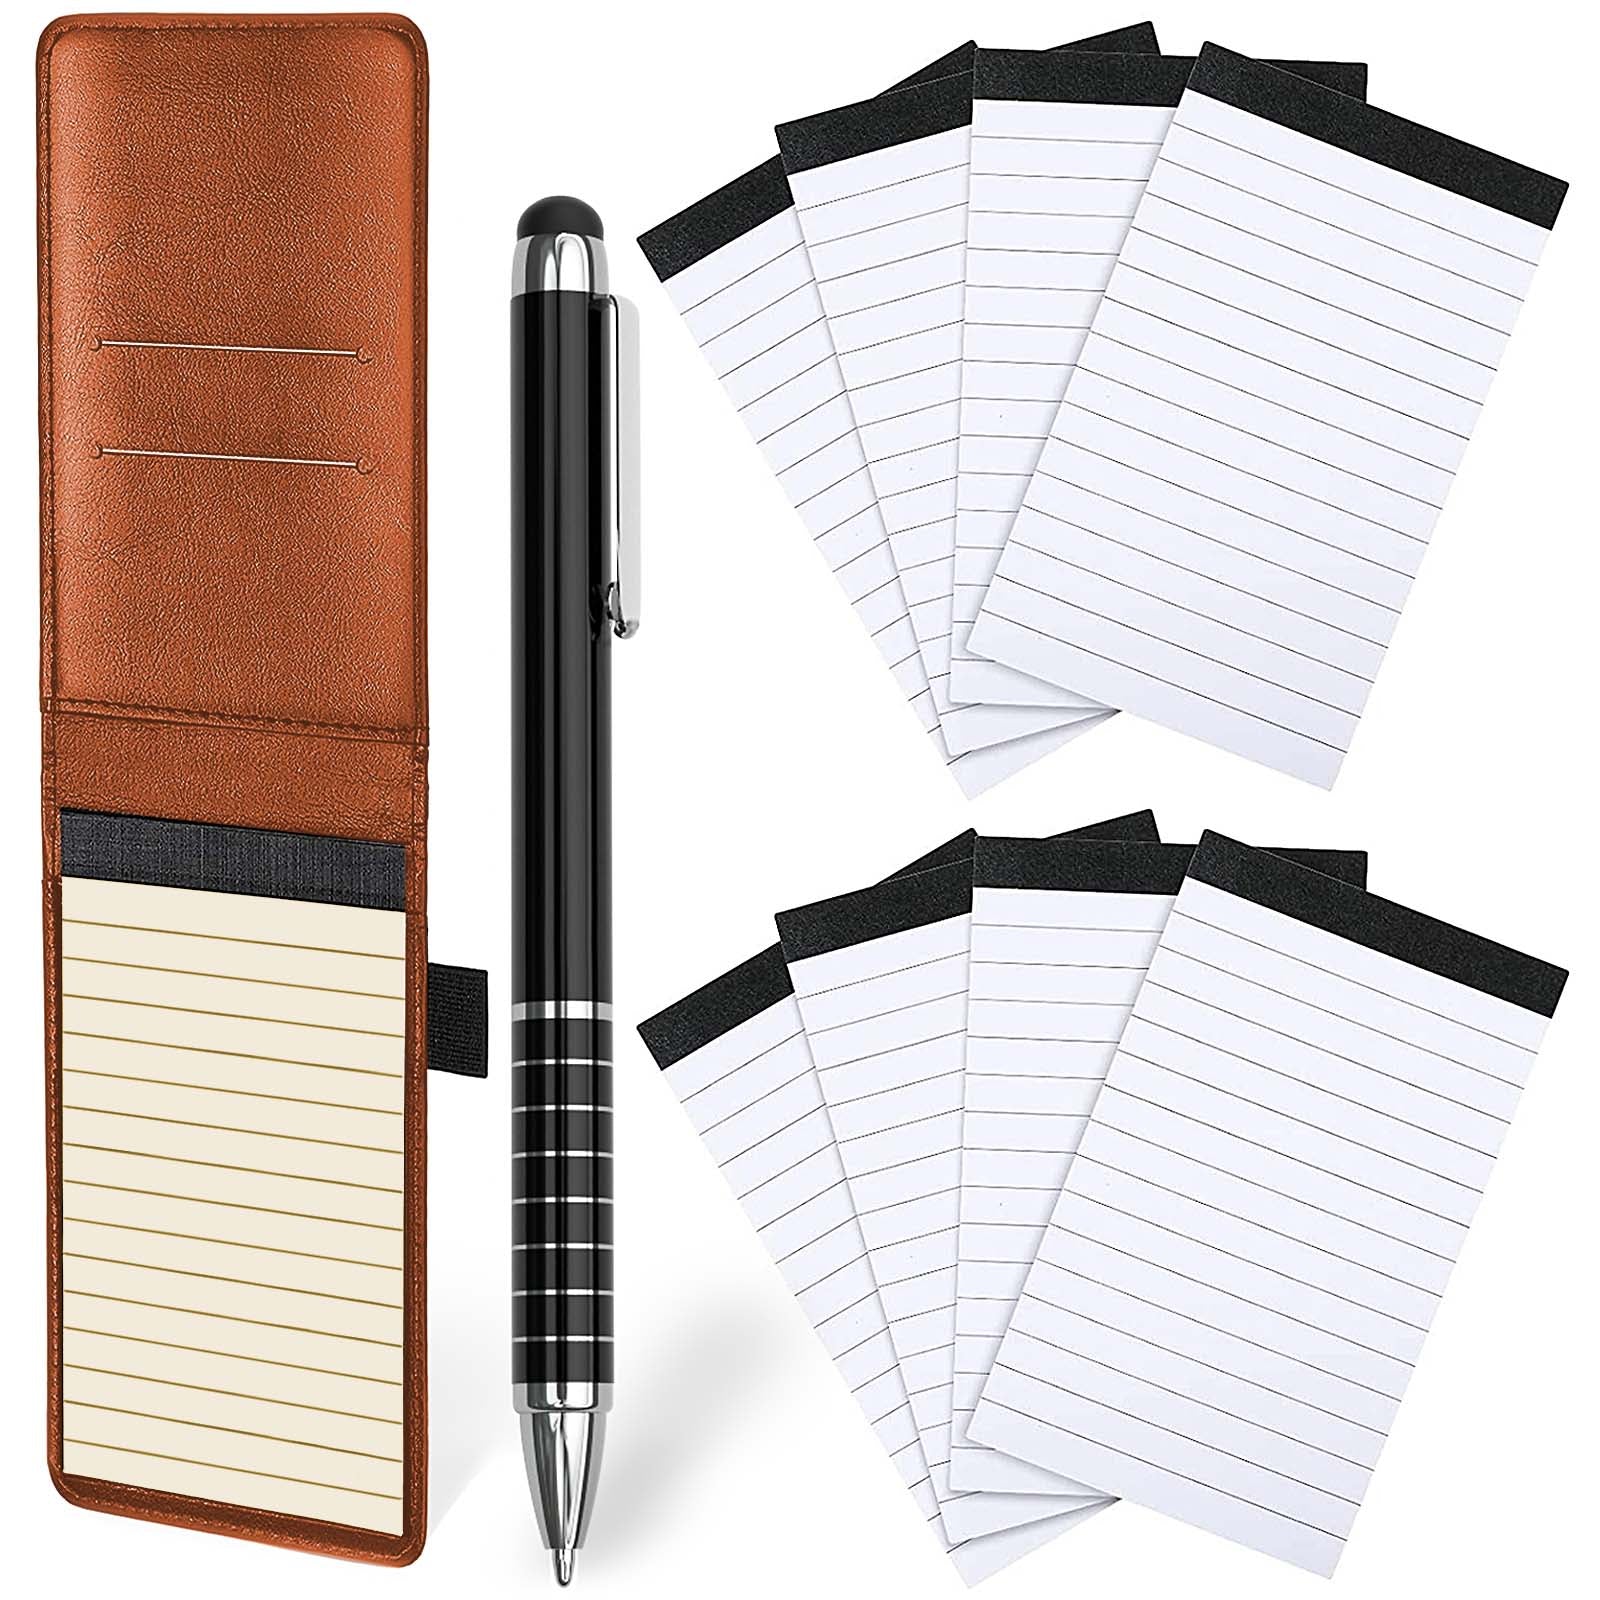 Nicpro Small Notepads Holder Set, 10 Pieces Mini Pocket Notebook PU Leather with 1pcs Metal Pen and 8pcs Lined Memo Book Refills for Meeting, Daily Records, Notes (Brown)